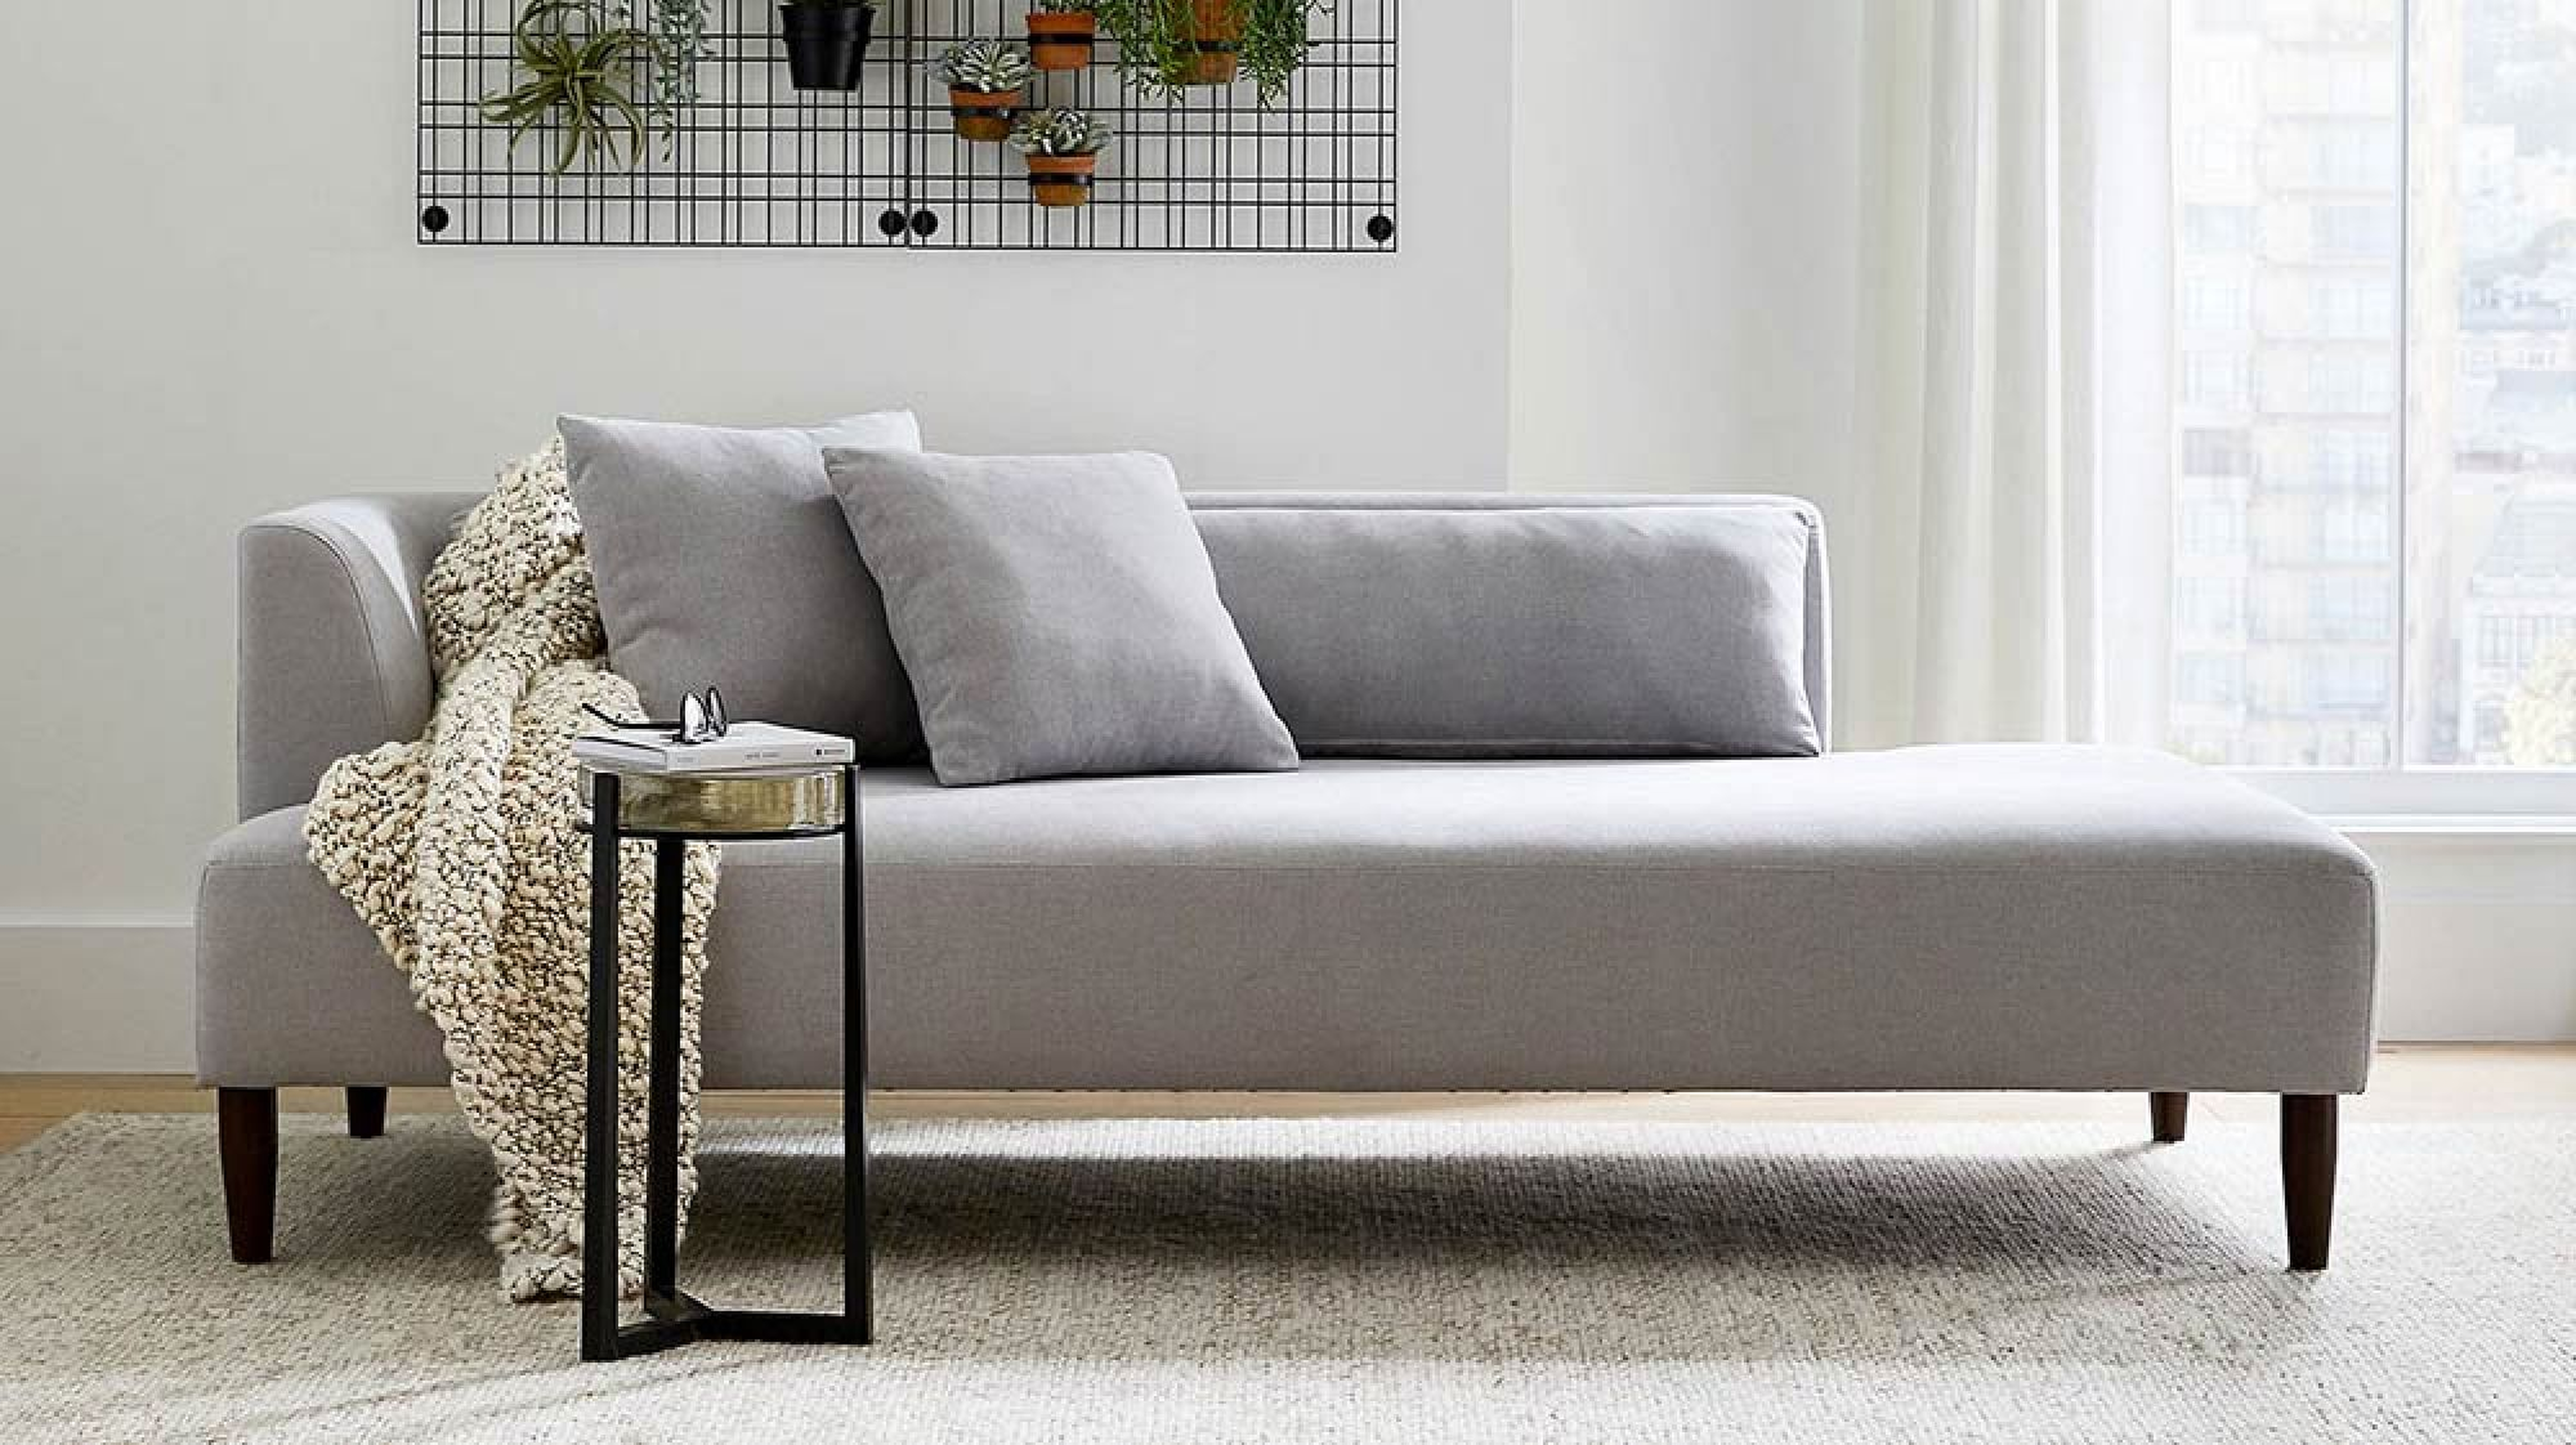 SoMa Palomar Upholstered Chaise Lounge, Polyester Wrapped Cushions, Park Weave Ash - Pottery Barn